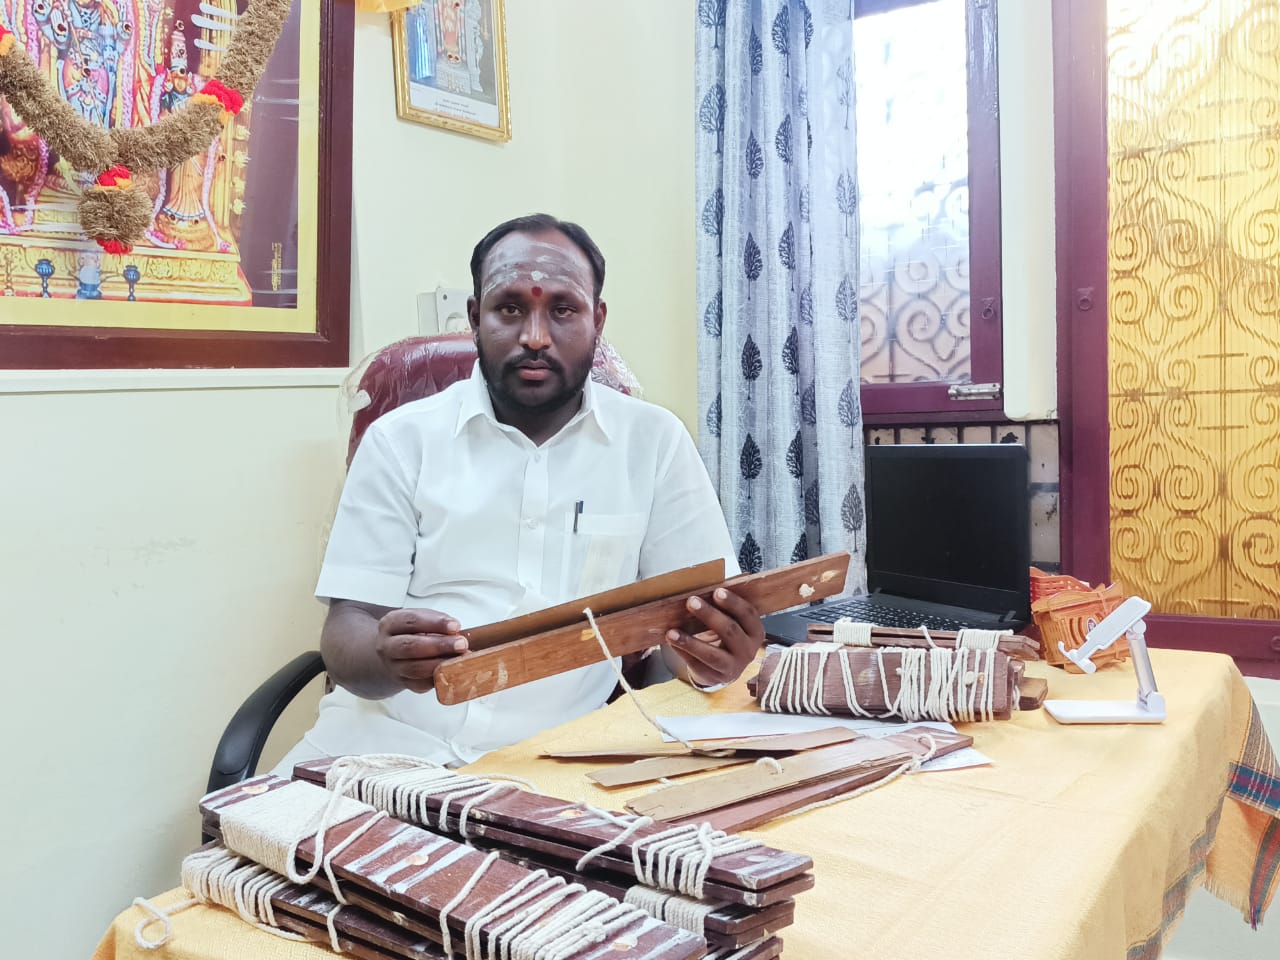 Mahashivan Nadi Astrolgey Center in vaitheeswaran Koil is located in mayiladuthurai district in India. They are the best Nadi Astrology center in India.